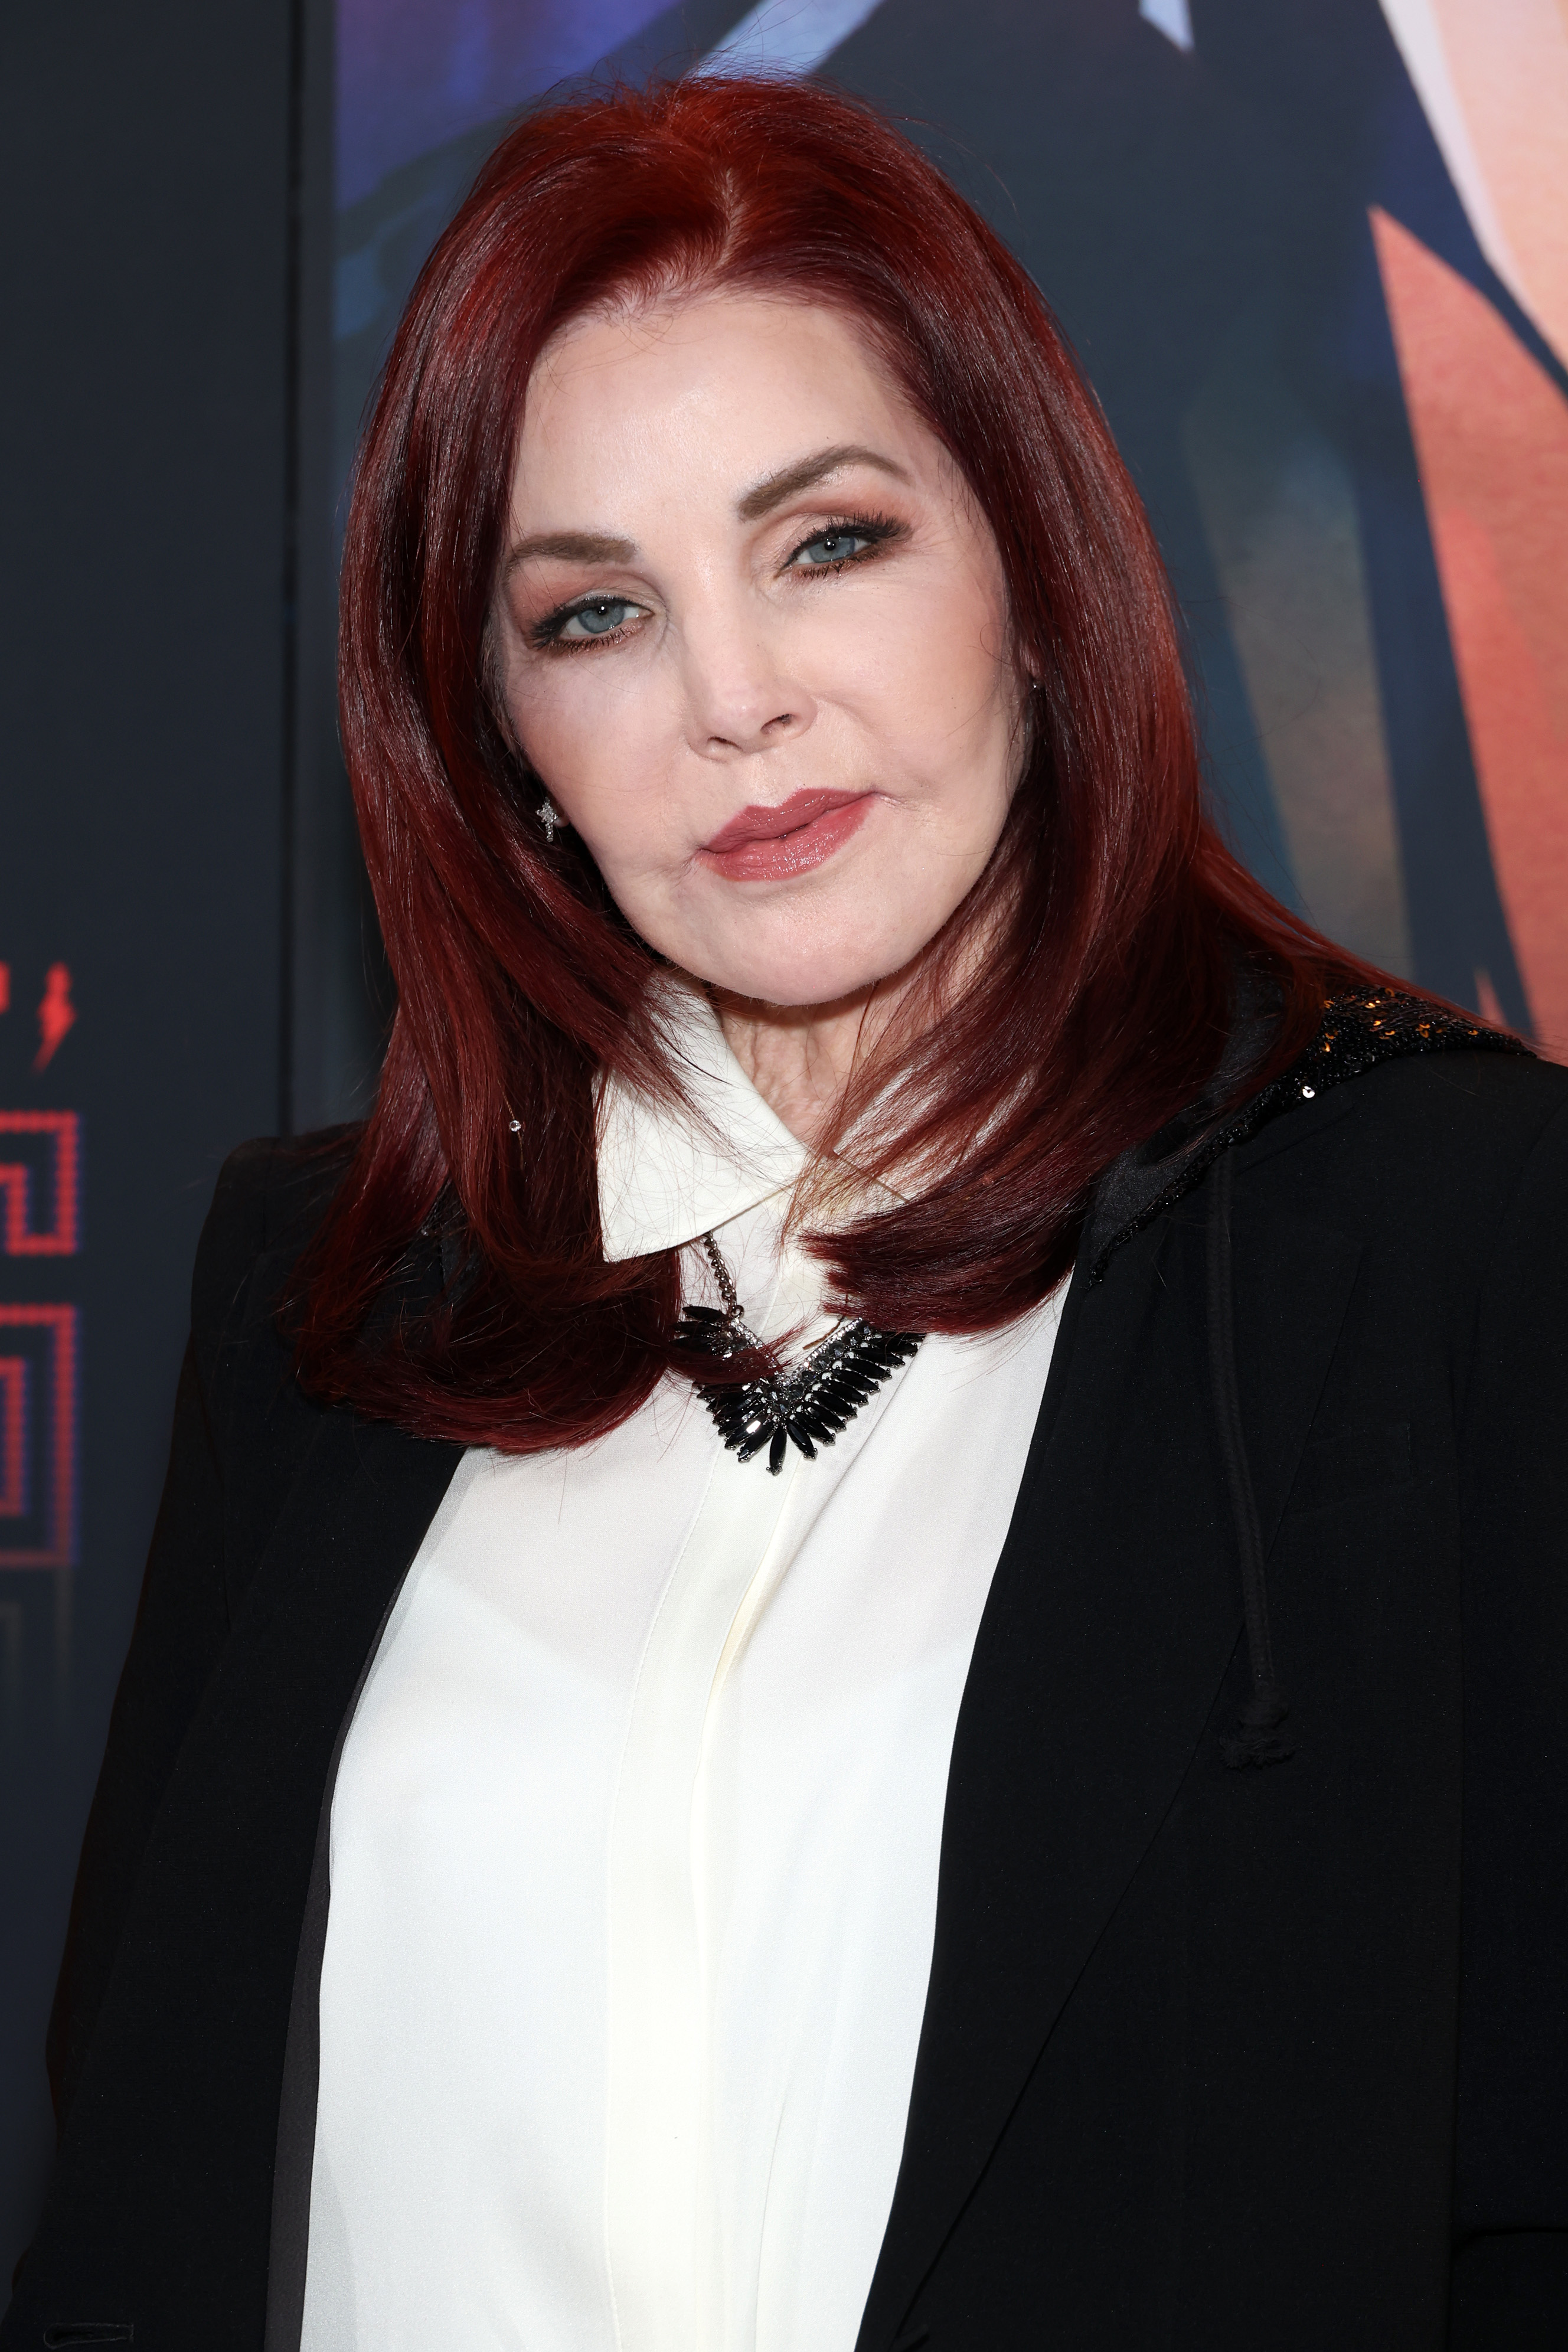 Priscilla Presley attends the advance screening event photo call for Netflix's "Agent Elvis" at TUDUM Theater on March 7, 2023 in Hollywood, California | Source: Getty Images